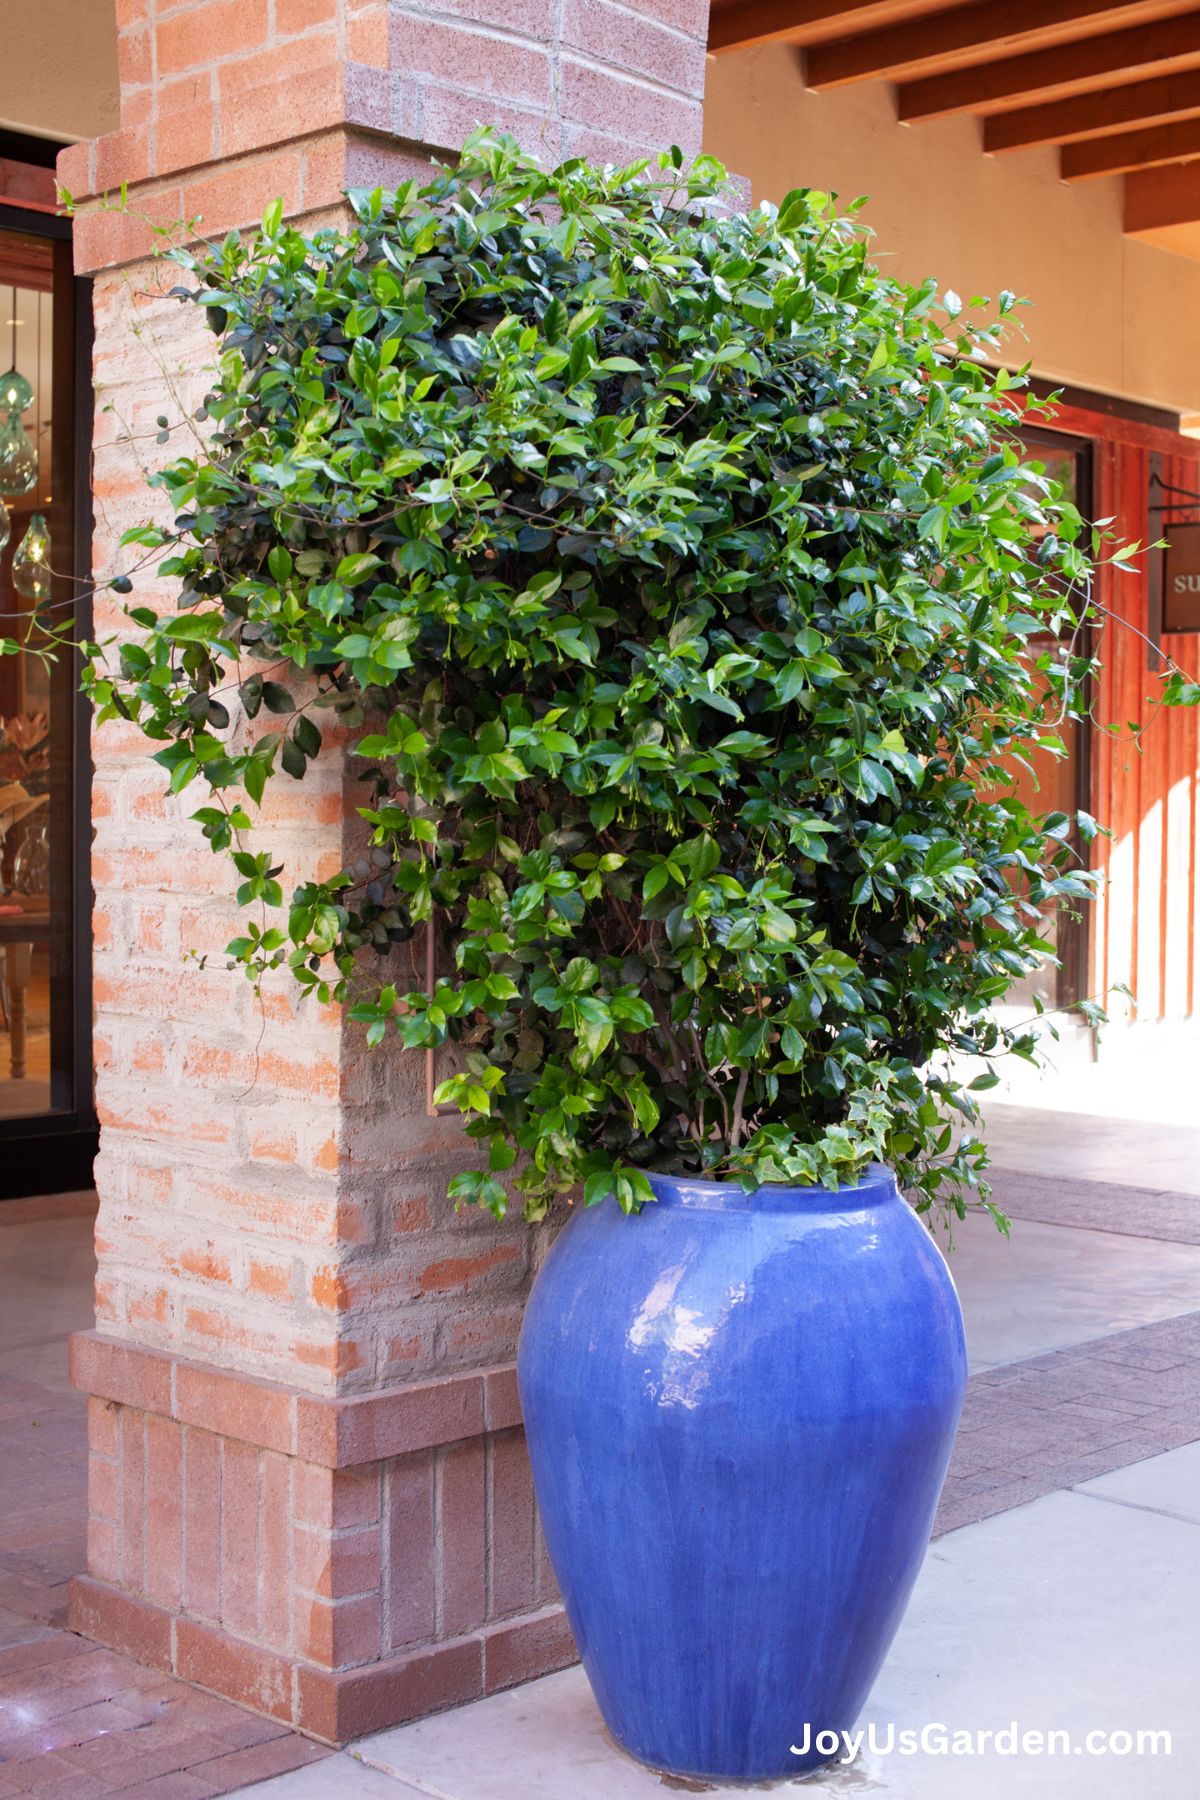 Star Jasmine growing in a large blue pot outdoors in a shopping center. 